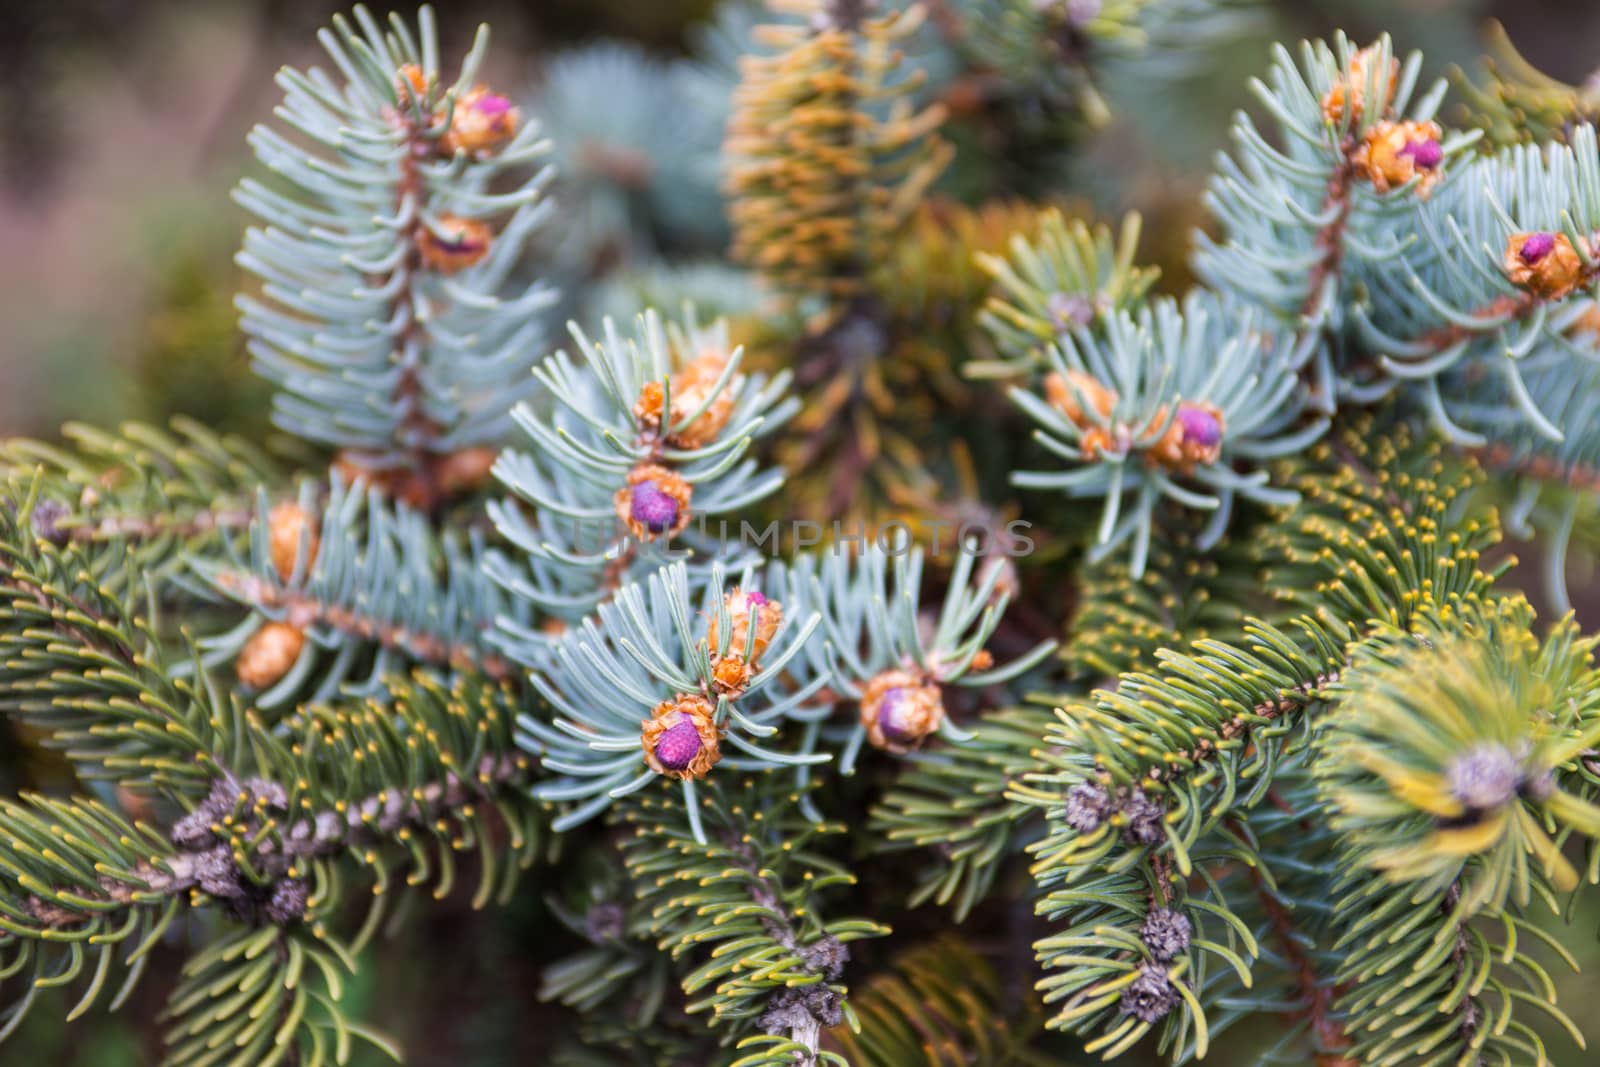 Evergreen branches of the Colorado blue spruce with young pink cones.